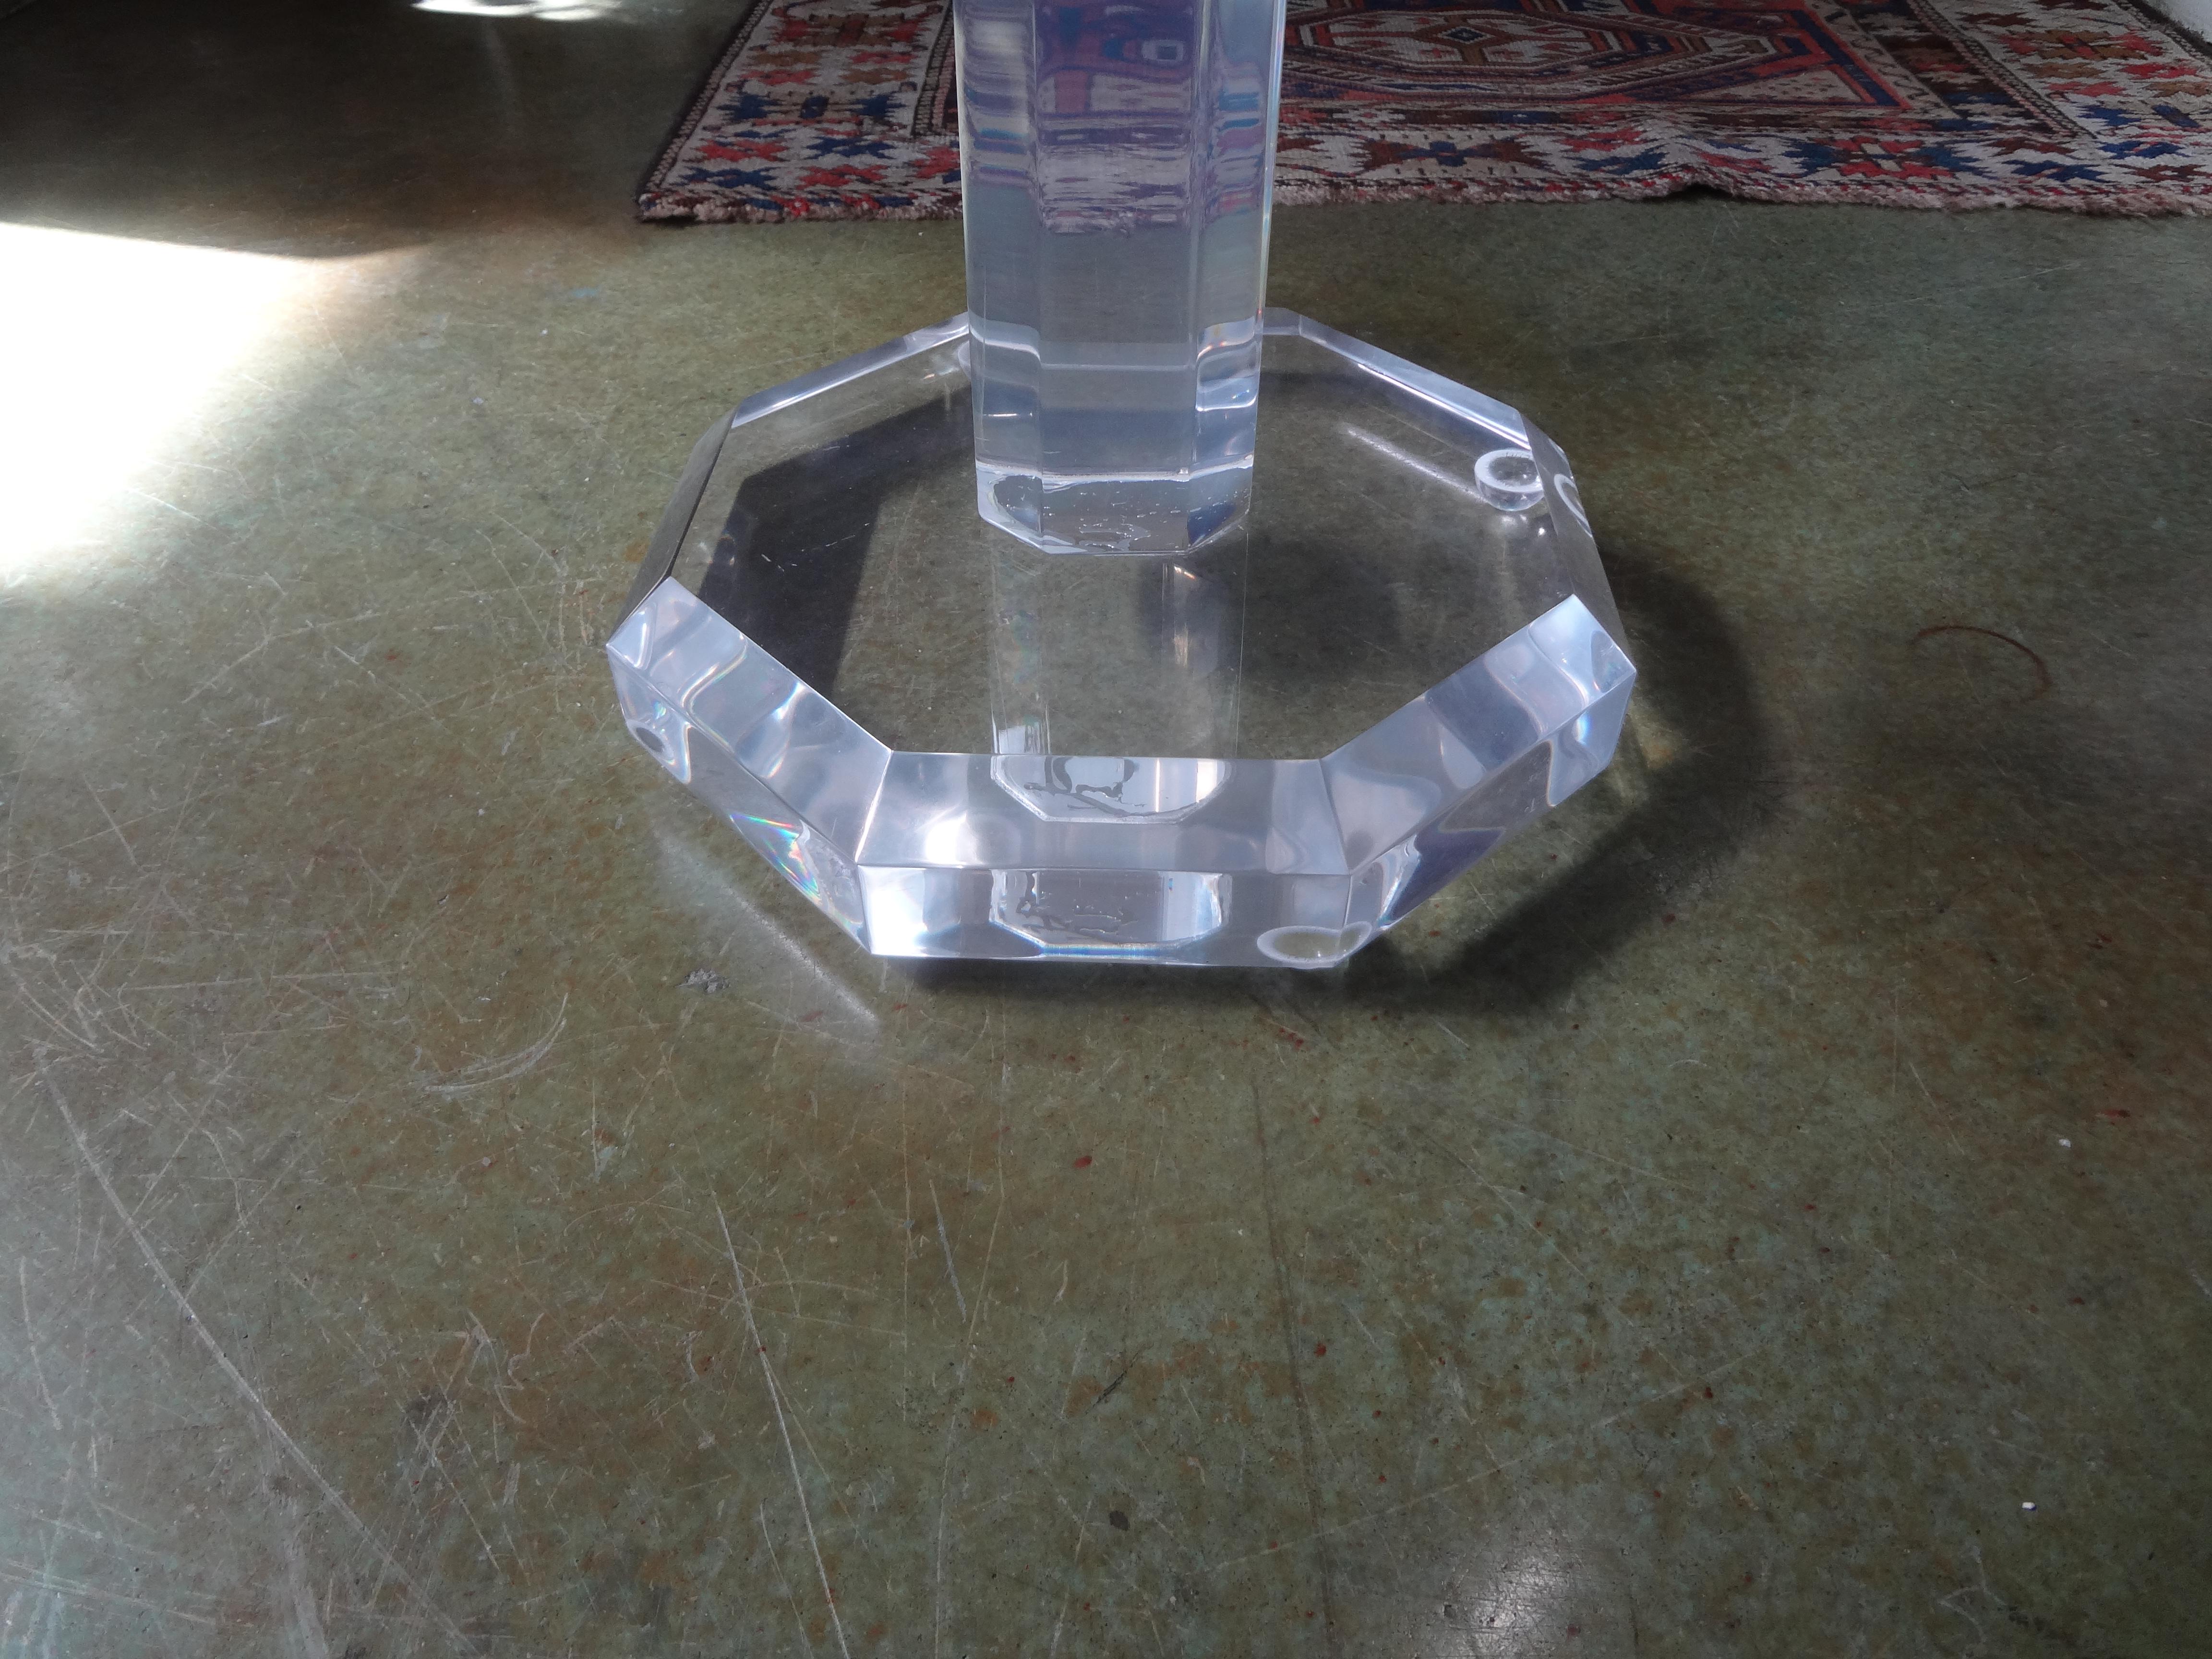 Strong Mid-Century Modern octagonal acrylic or Lucite table, side table, guéridon or drinks table. This vintage table features thick acrylic with a beautiful bevel.
Perfect for between chairs or wherever a side table is needed.